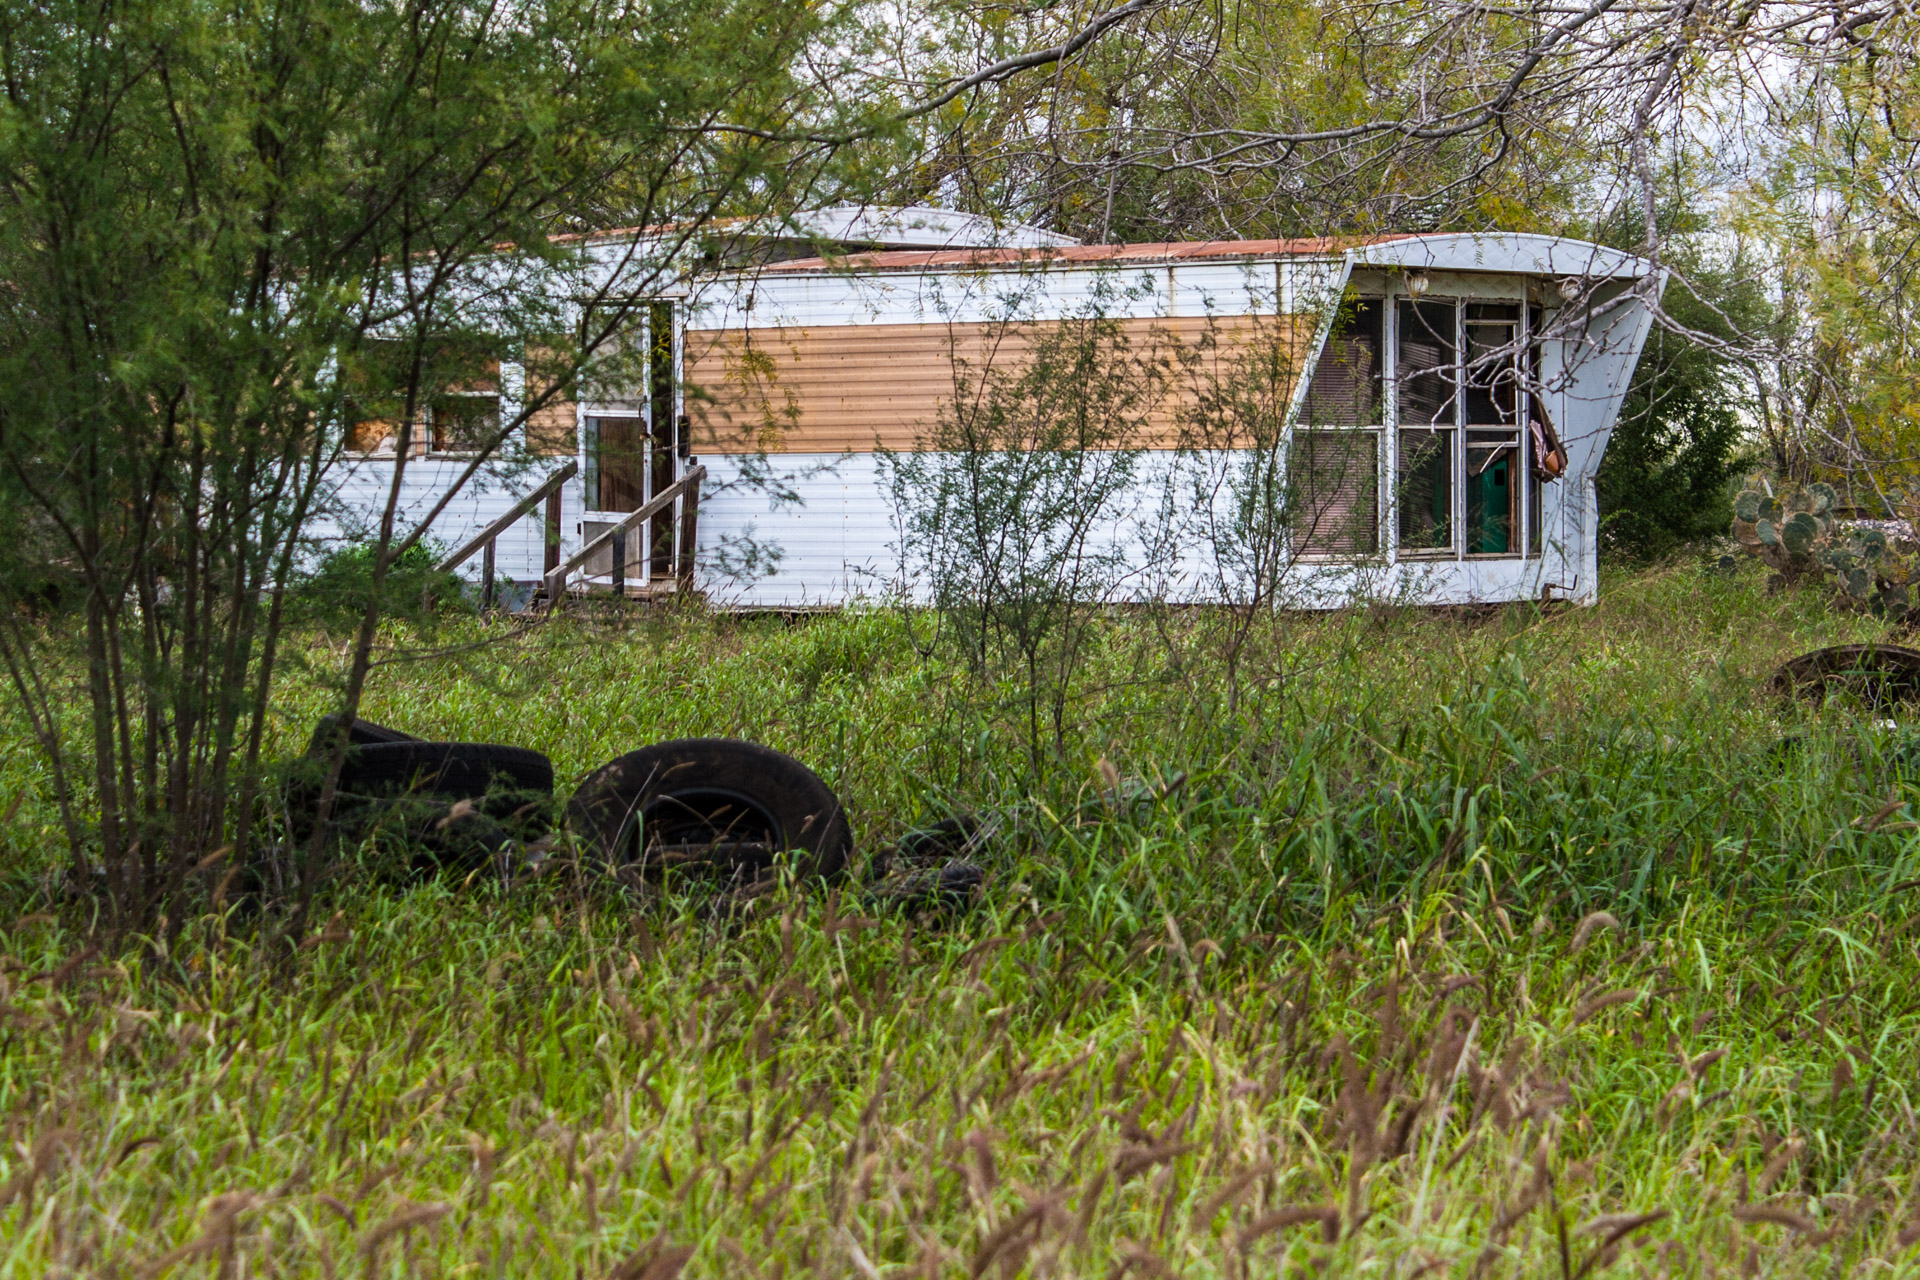 Pearsall, Texas - A Ruin, A Trailer, And Some Tires (trailer close)